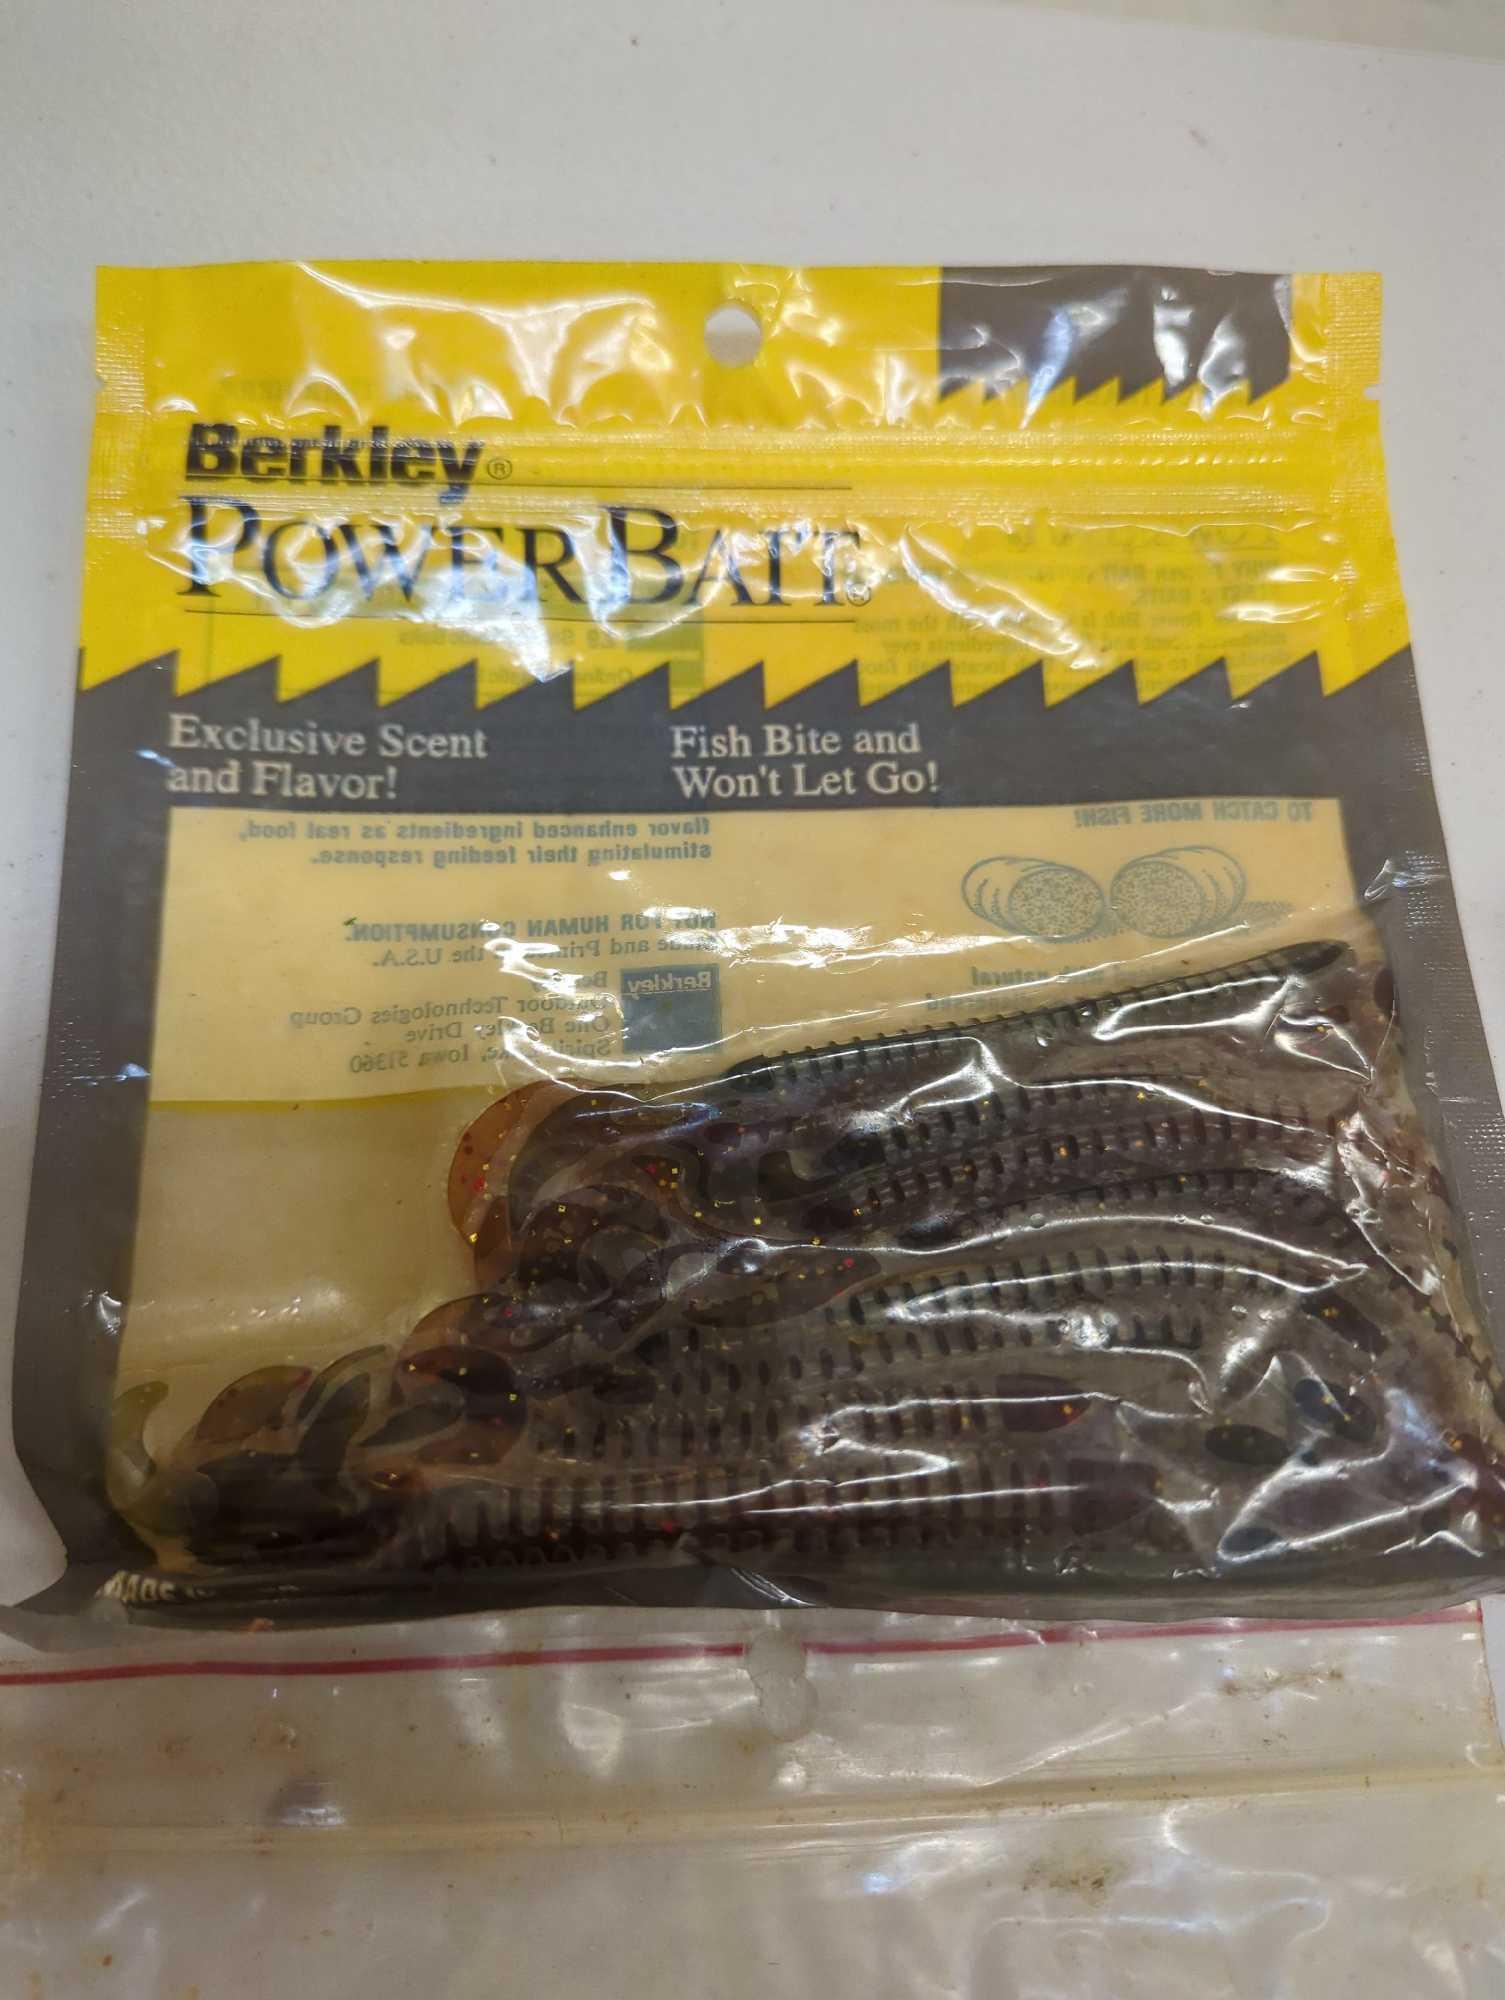 Contents of box includes fishing various fishing power baits. Comes as is shown in photos. Appears